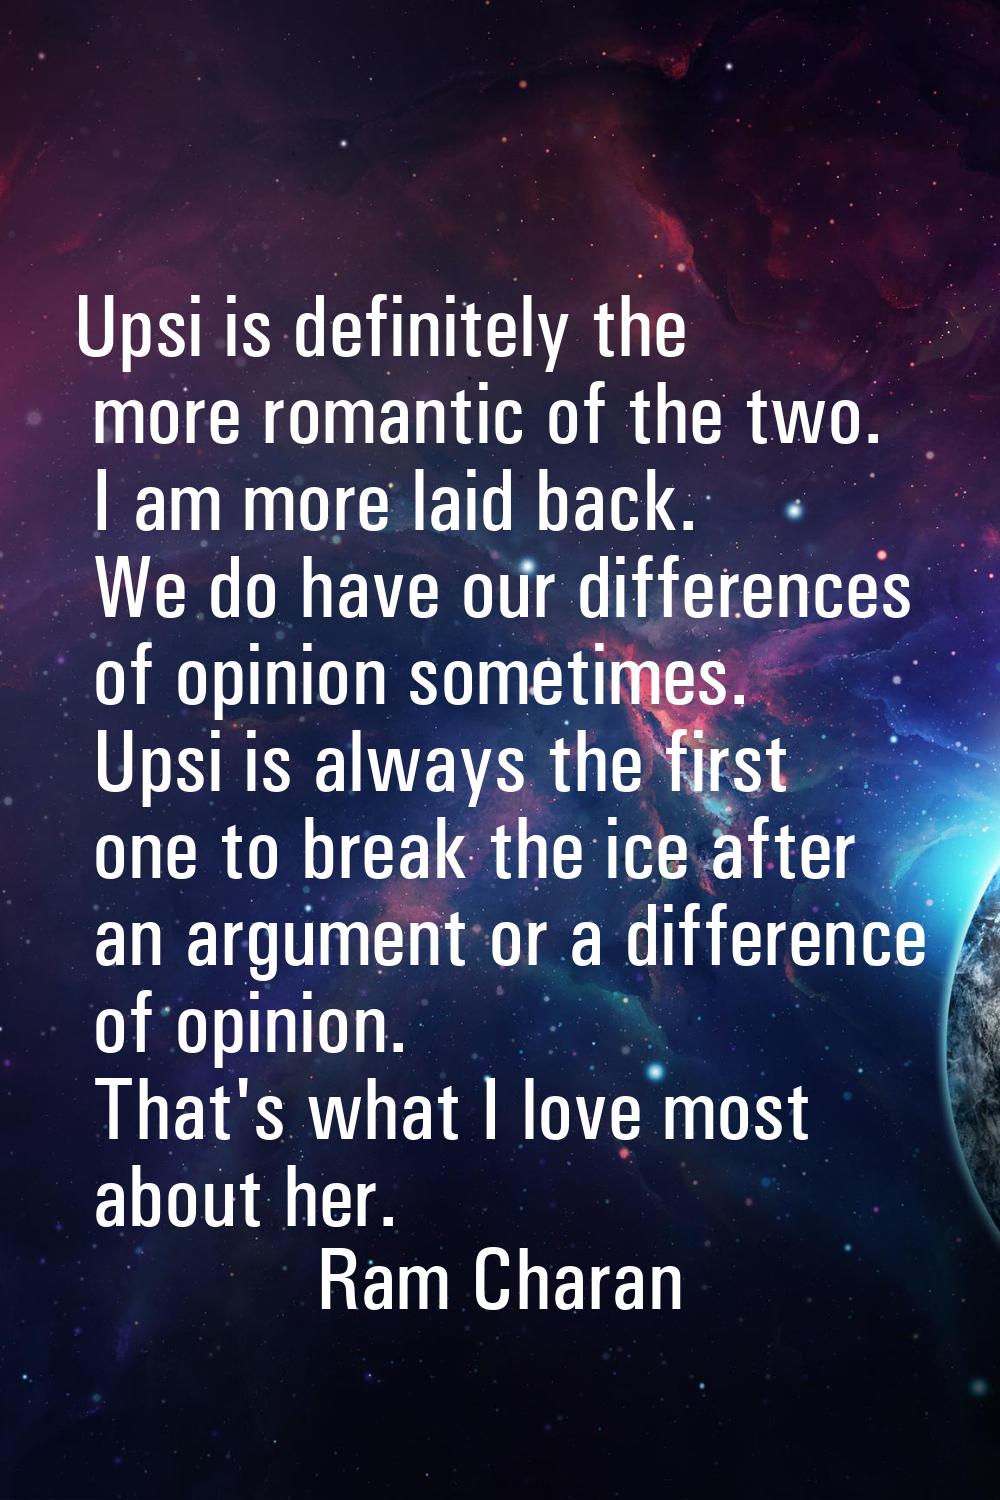 Upsi is definitely the more romantic of the two. I am more laid back. We do have our differences of